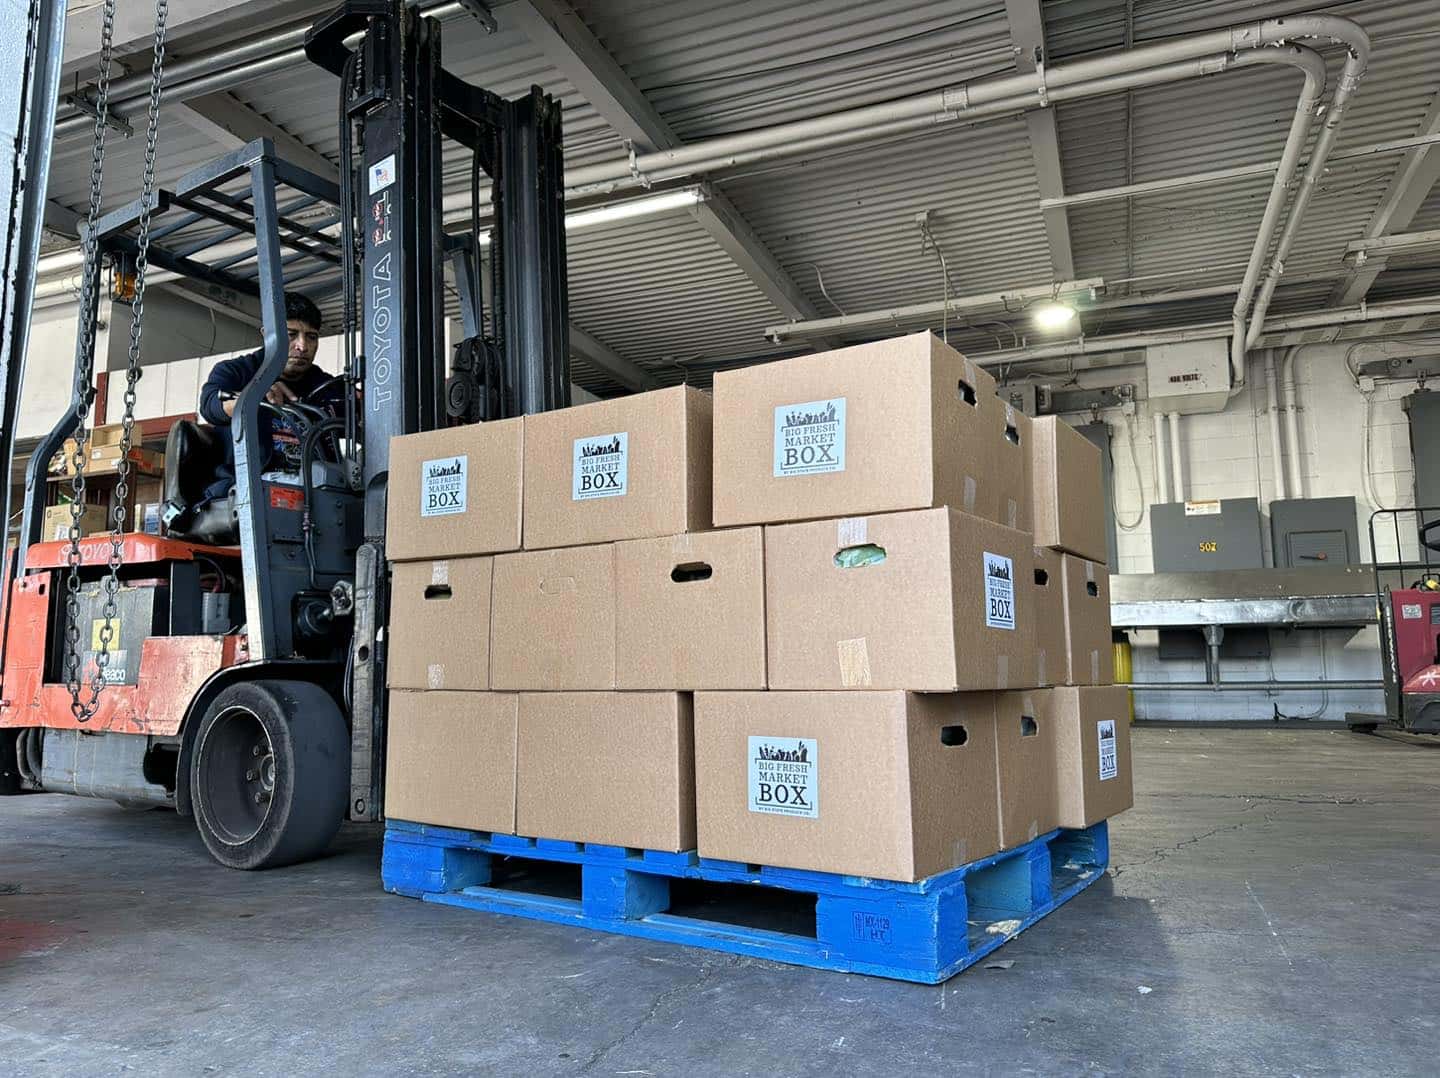 A forklift holding a stack of cardboard boxes is parked in a warehouse